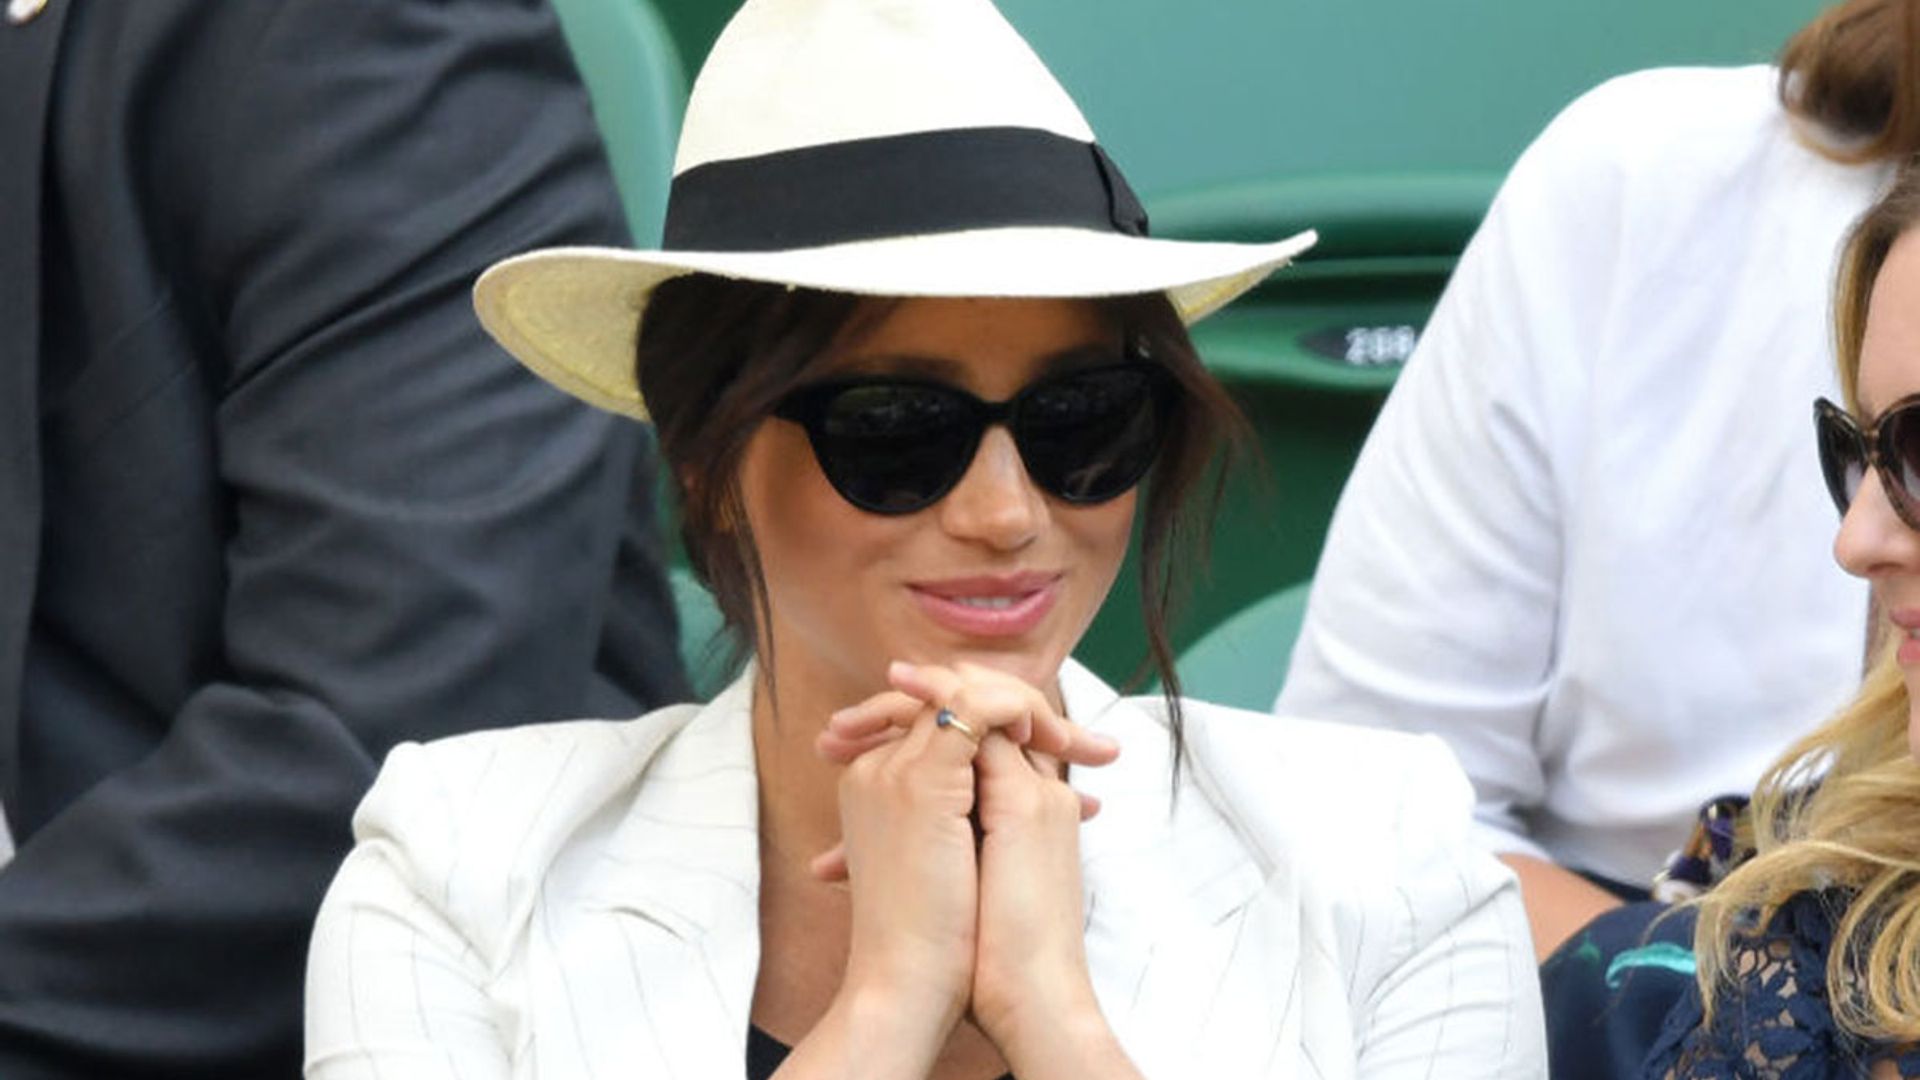 This M&S summer hat is giving us major Meghan Markle vibes